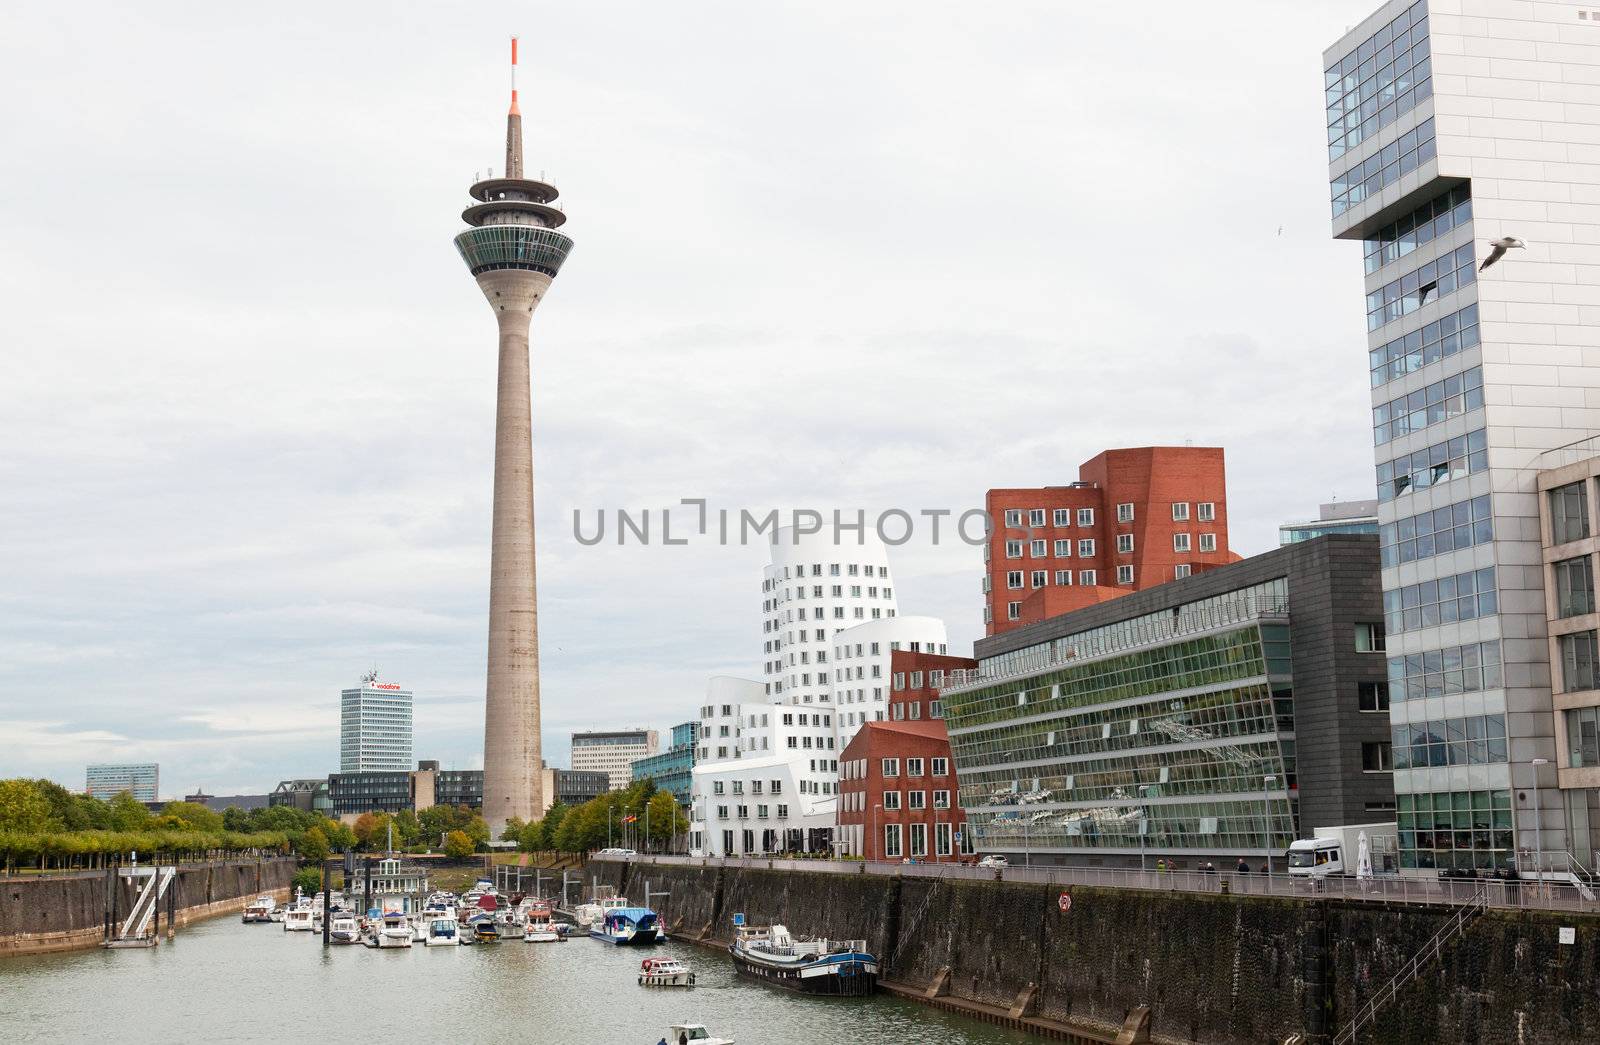 Television tower in Dusseldorf, Germany, 25.09.2012. Dusseldorf is included into the five of the largest economic, transport, cultural and political centers of Germany.